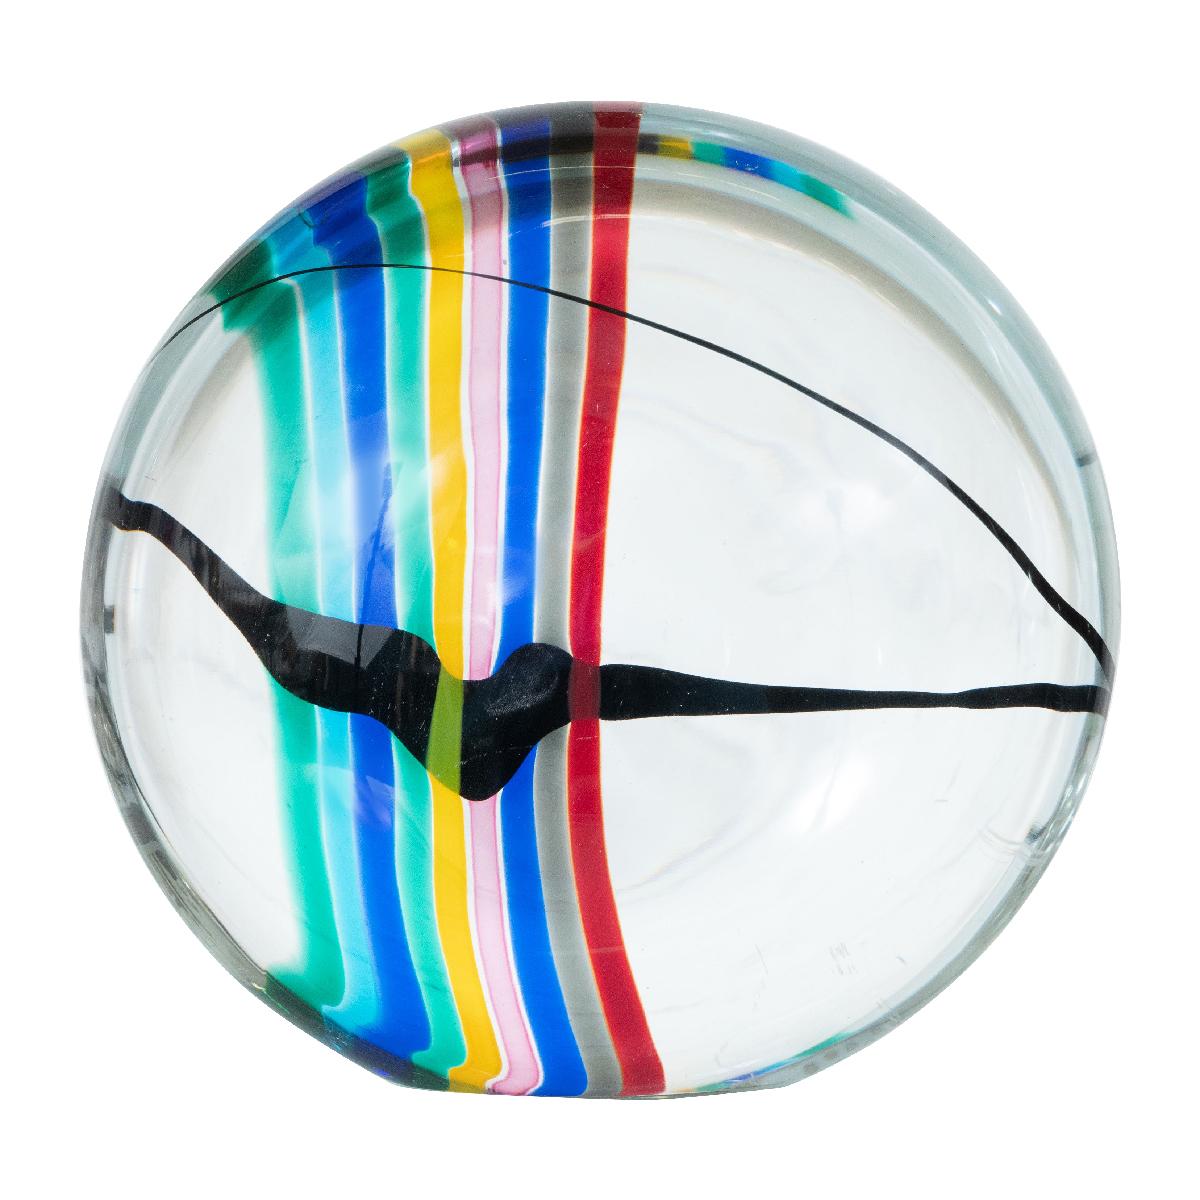 Circular clear Murano glass sculpture with colorful sommerso striping.